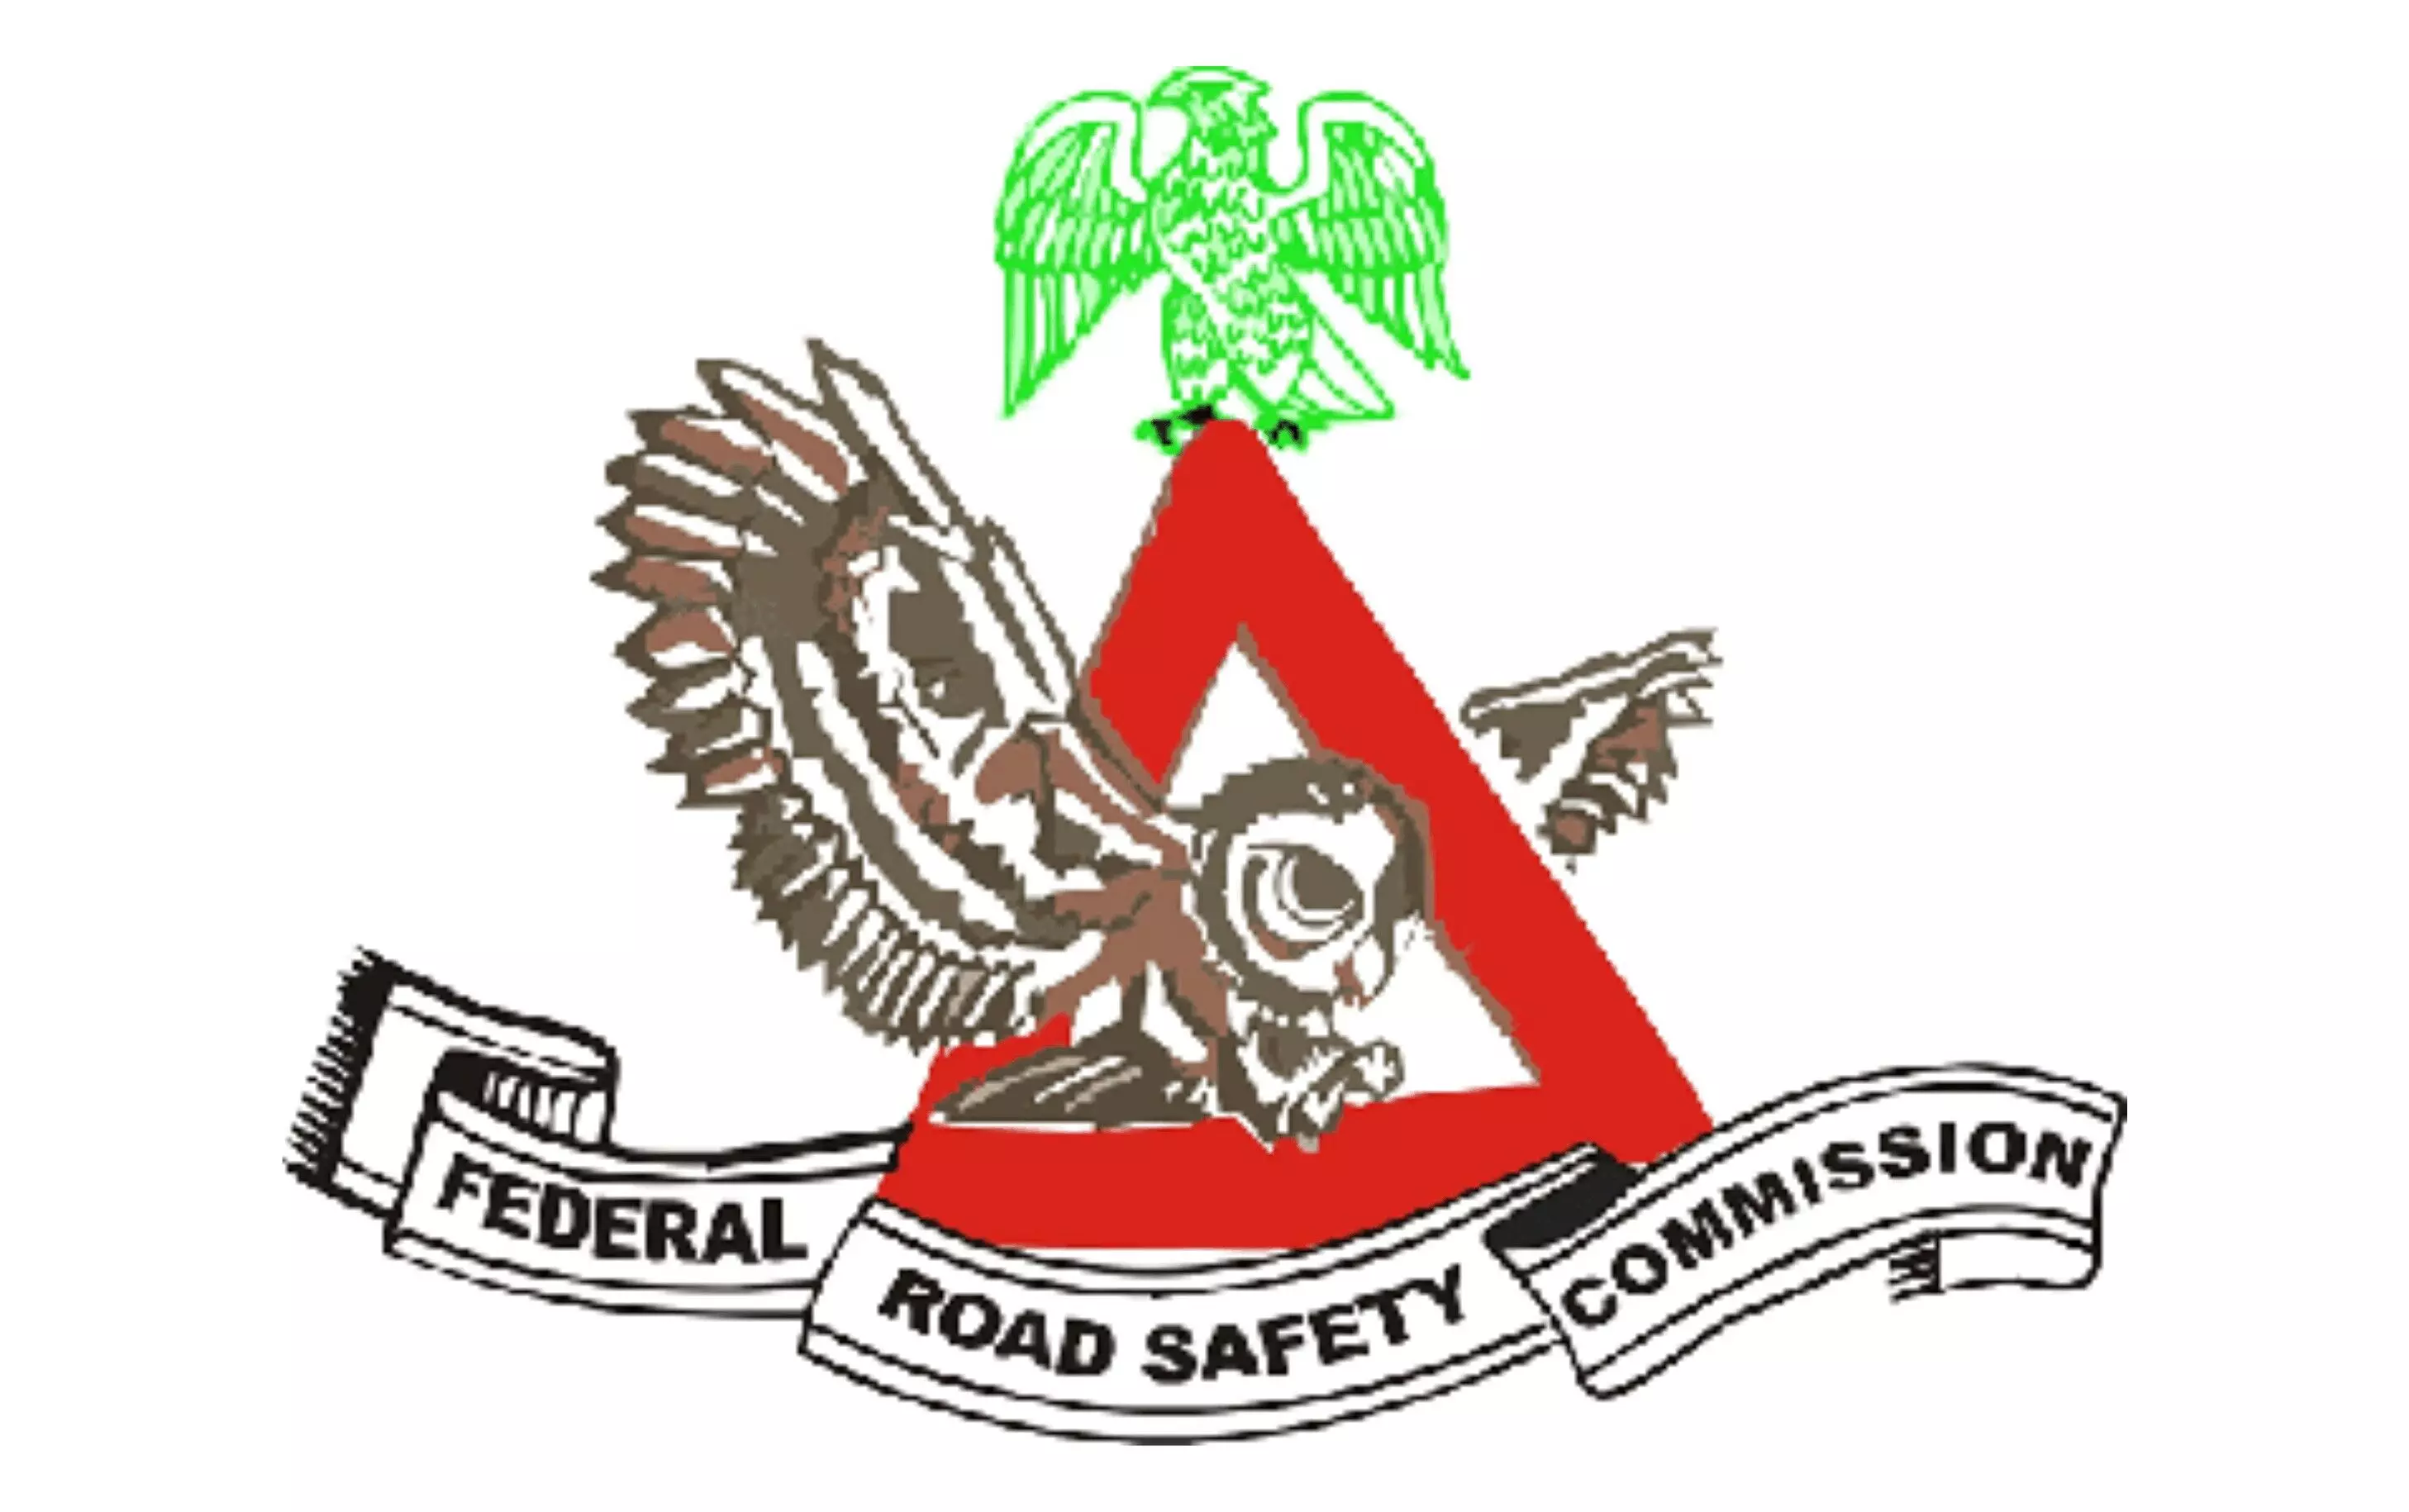 Accident claims 1 in Anambra – FRSC